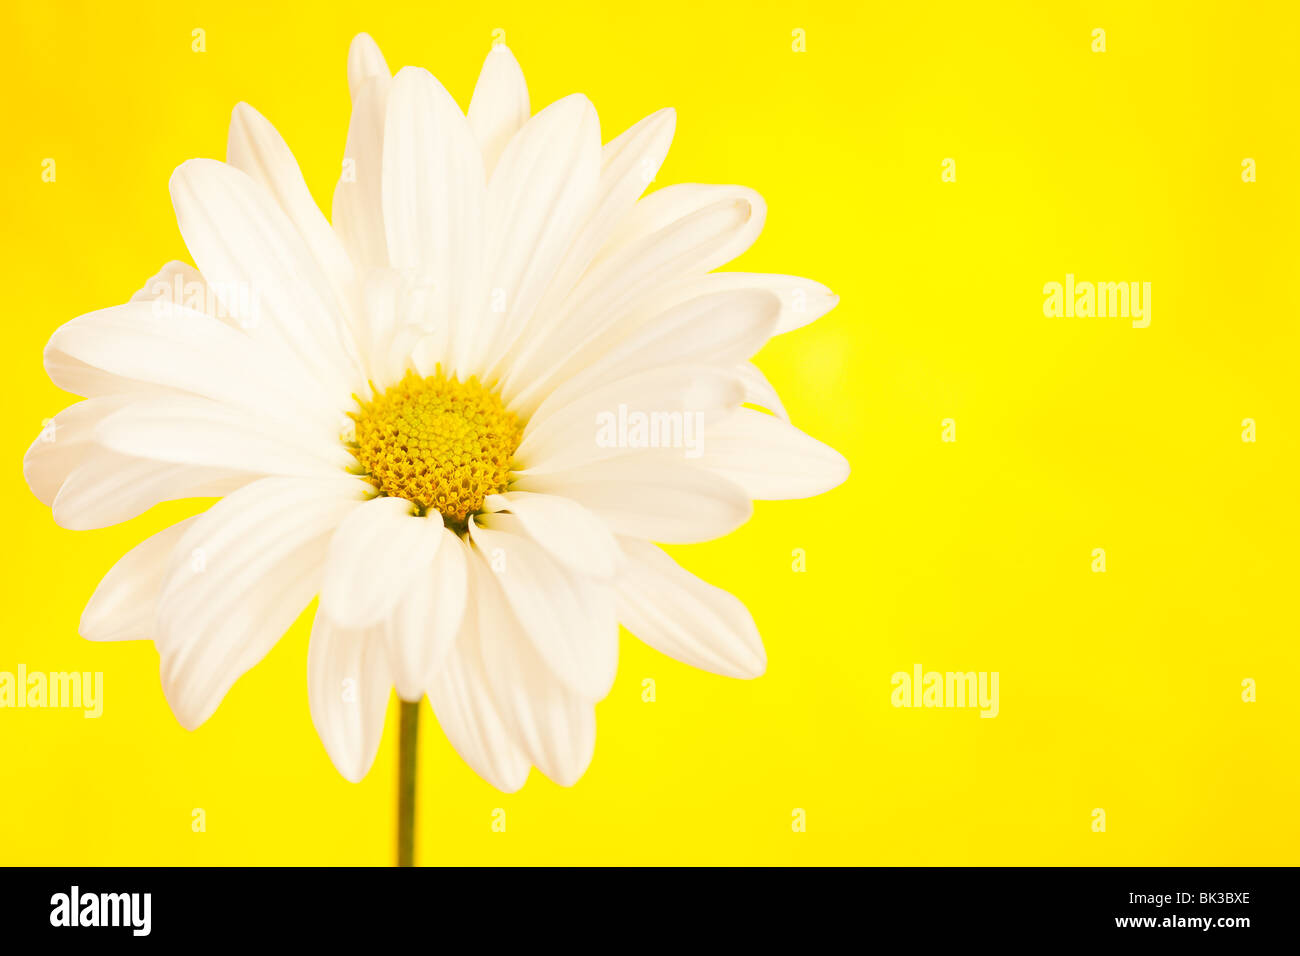 white and yellow daisy on a handpained watercolor background Stock Photo